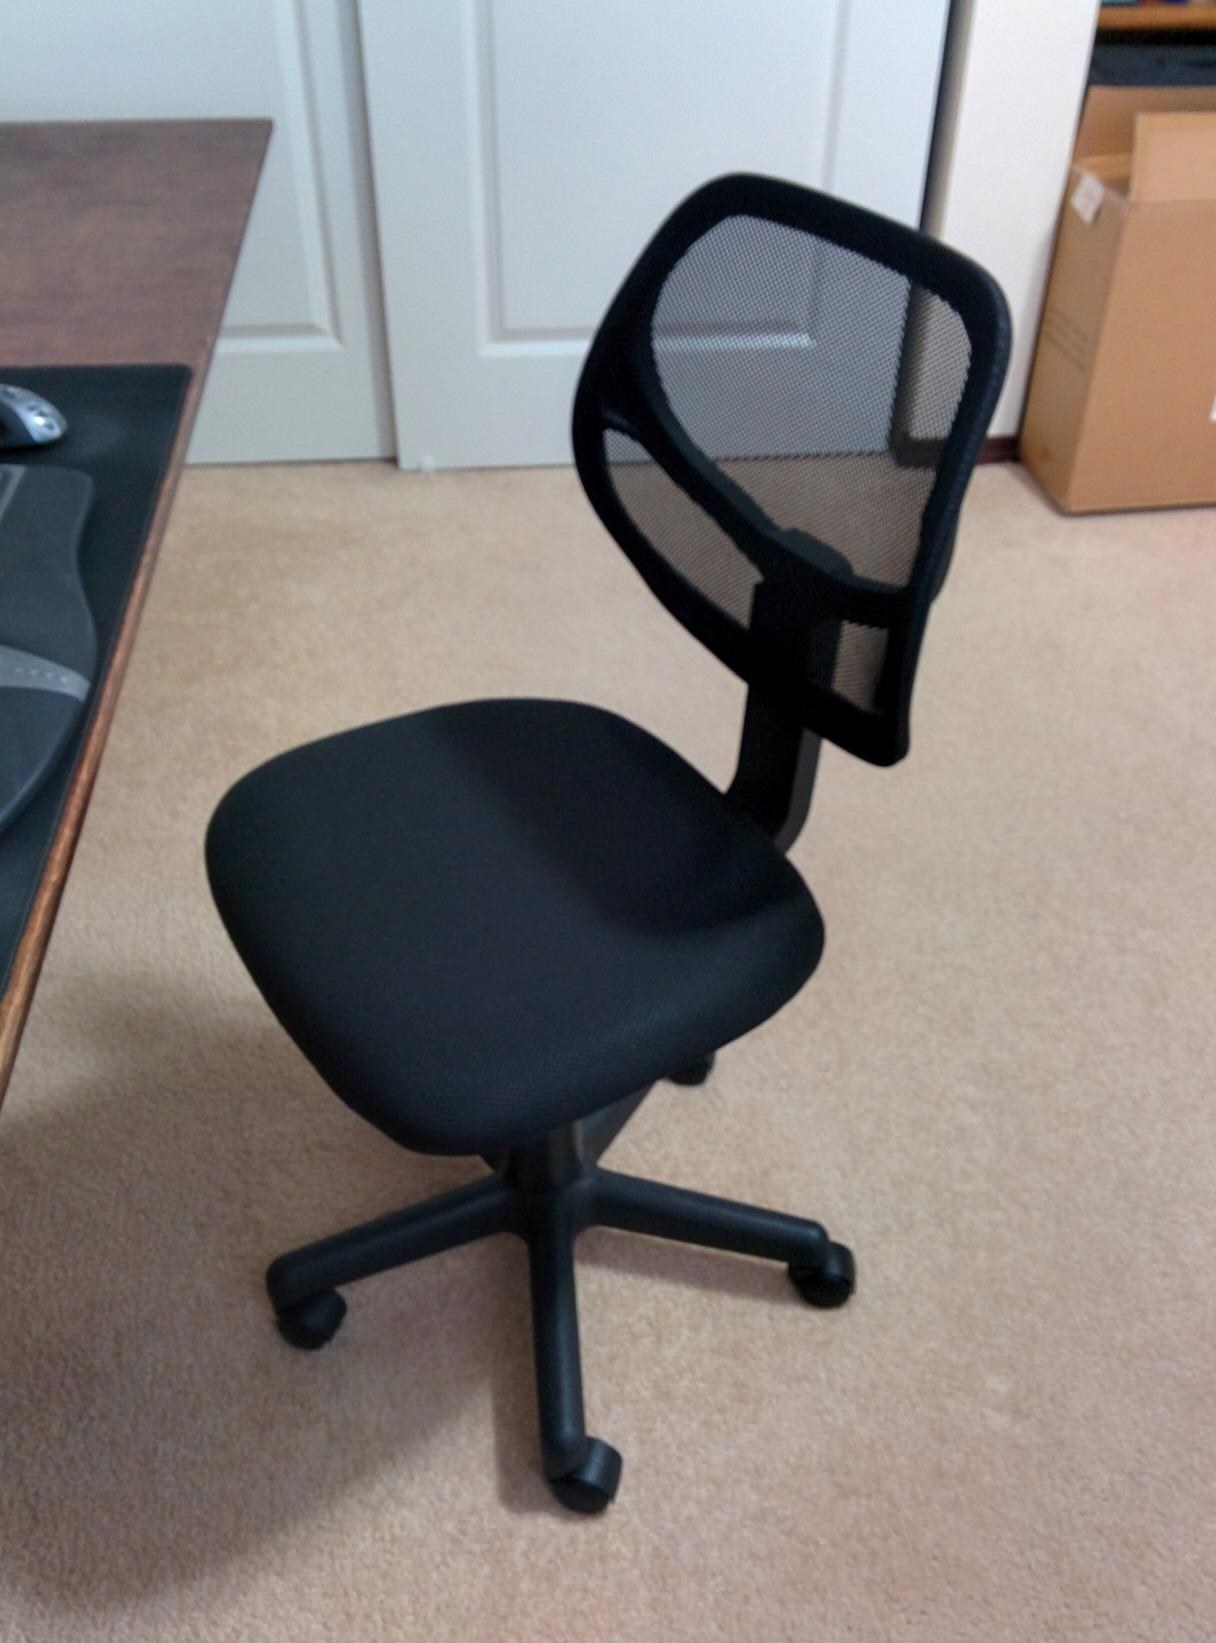 The chair in black